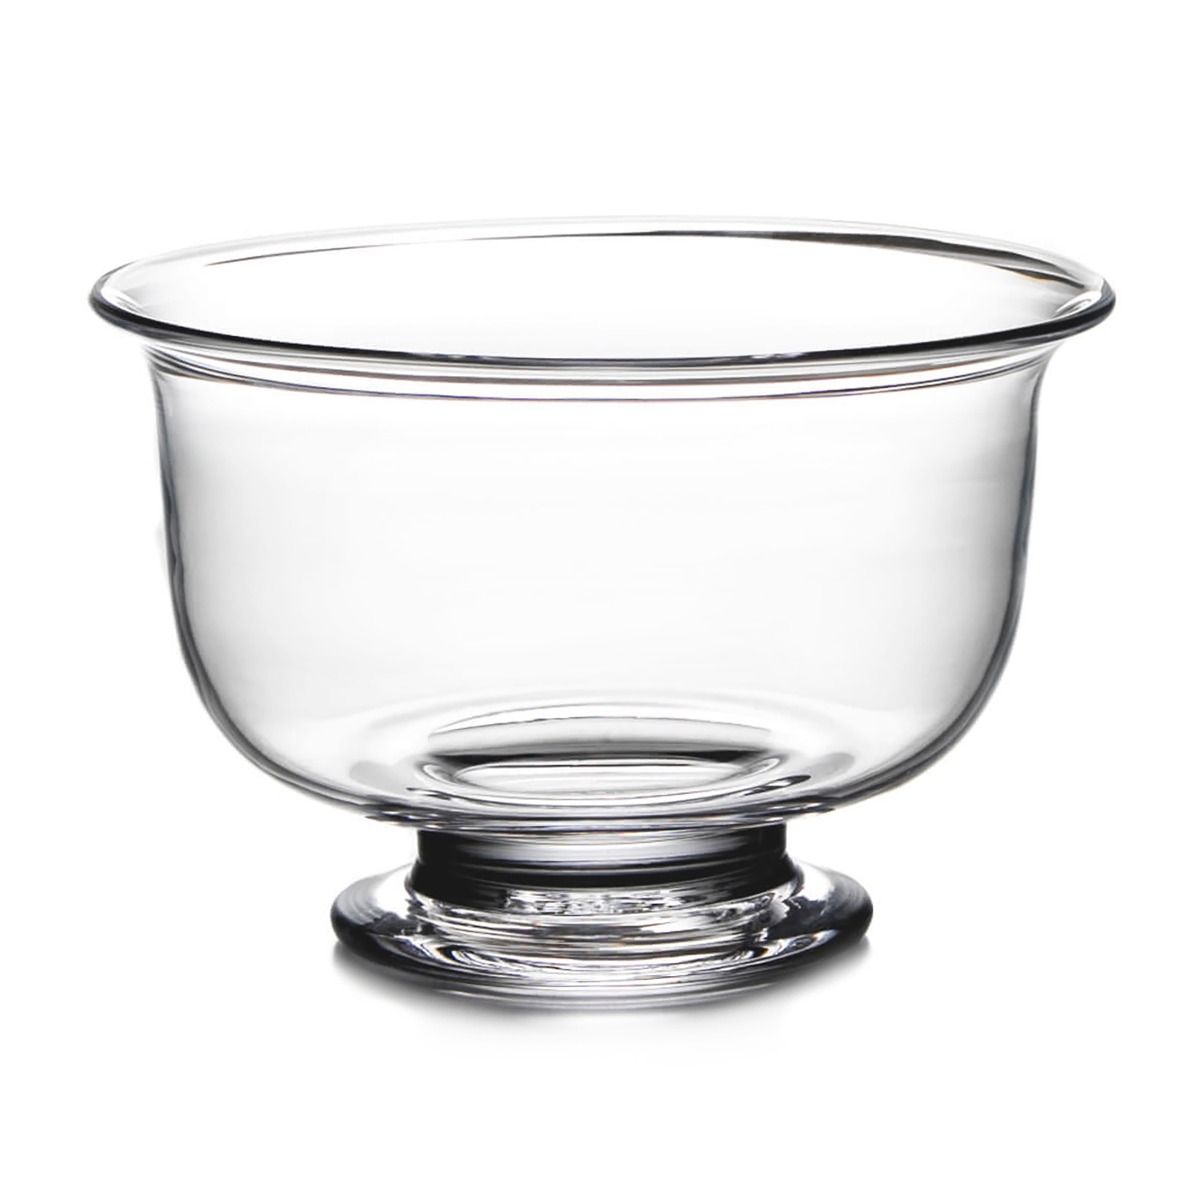 SIMON PEARCE BOWL GLASS REVERE (Available in 2 Sizes)